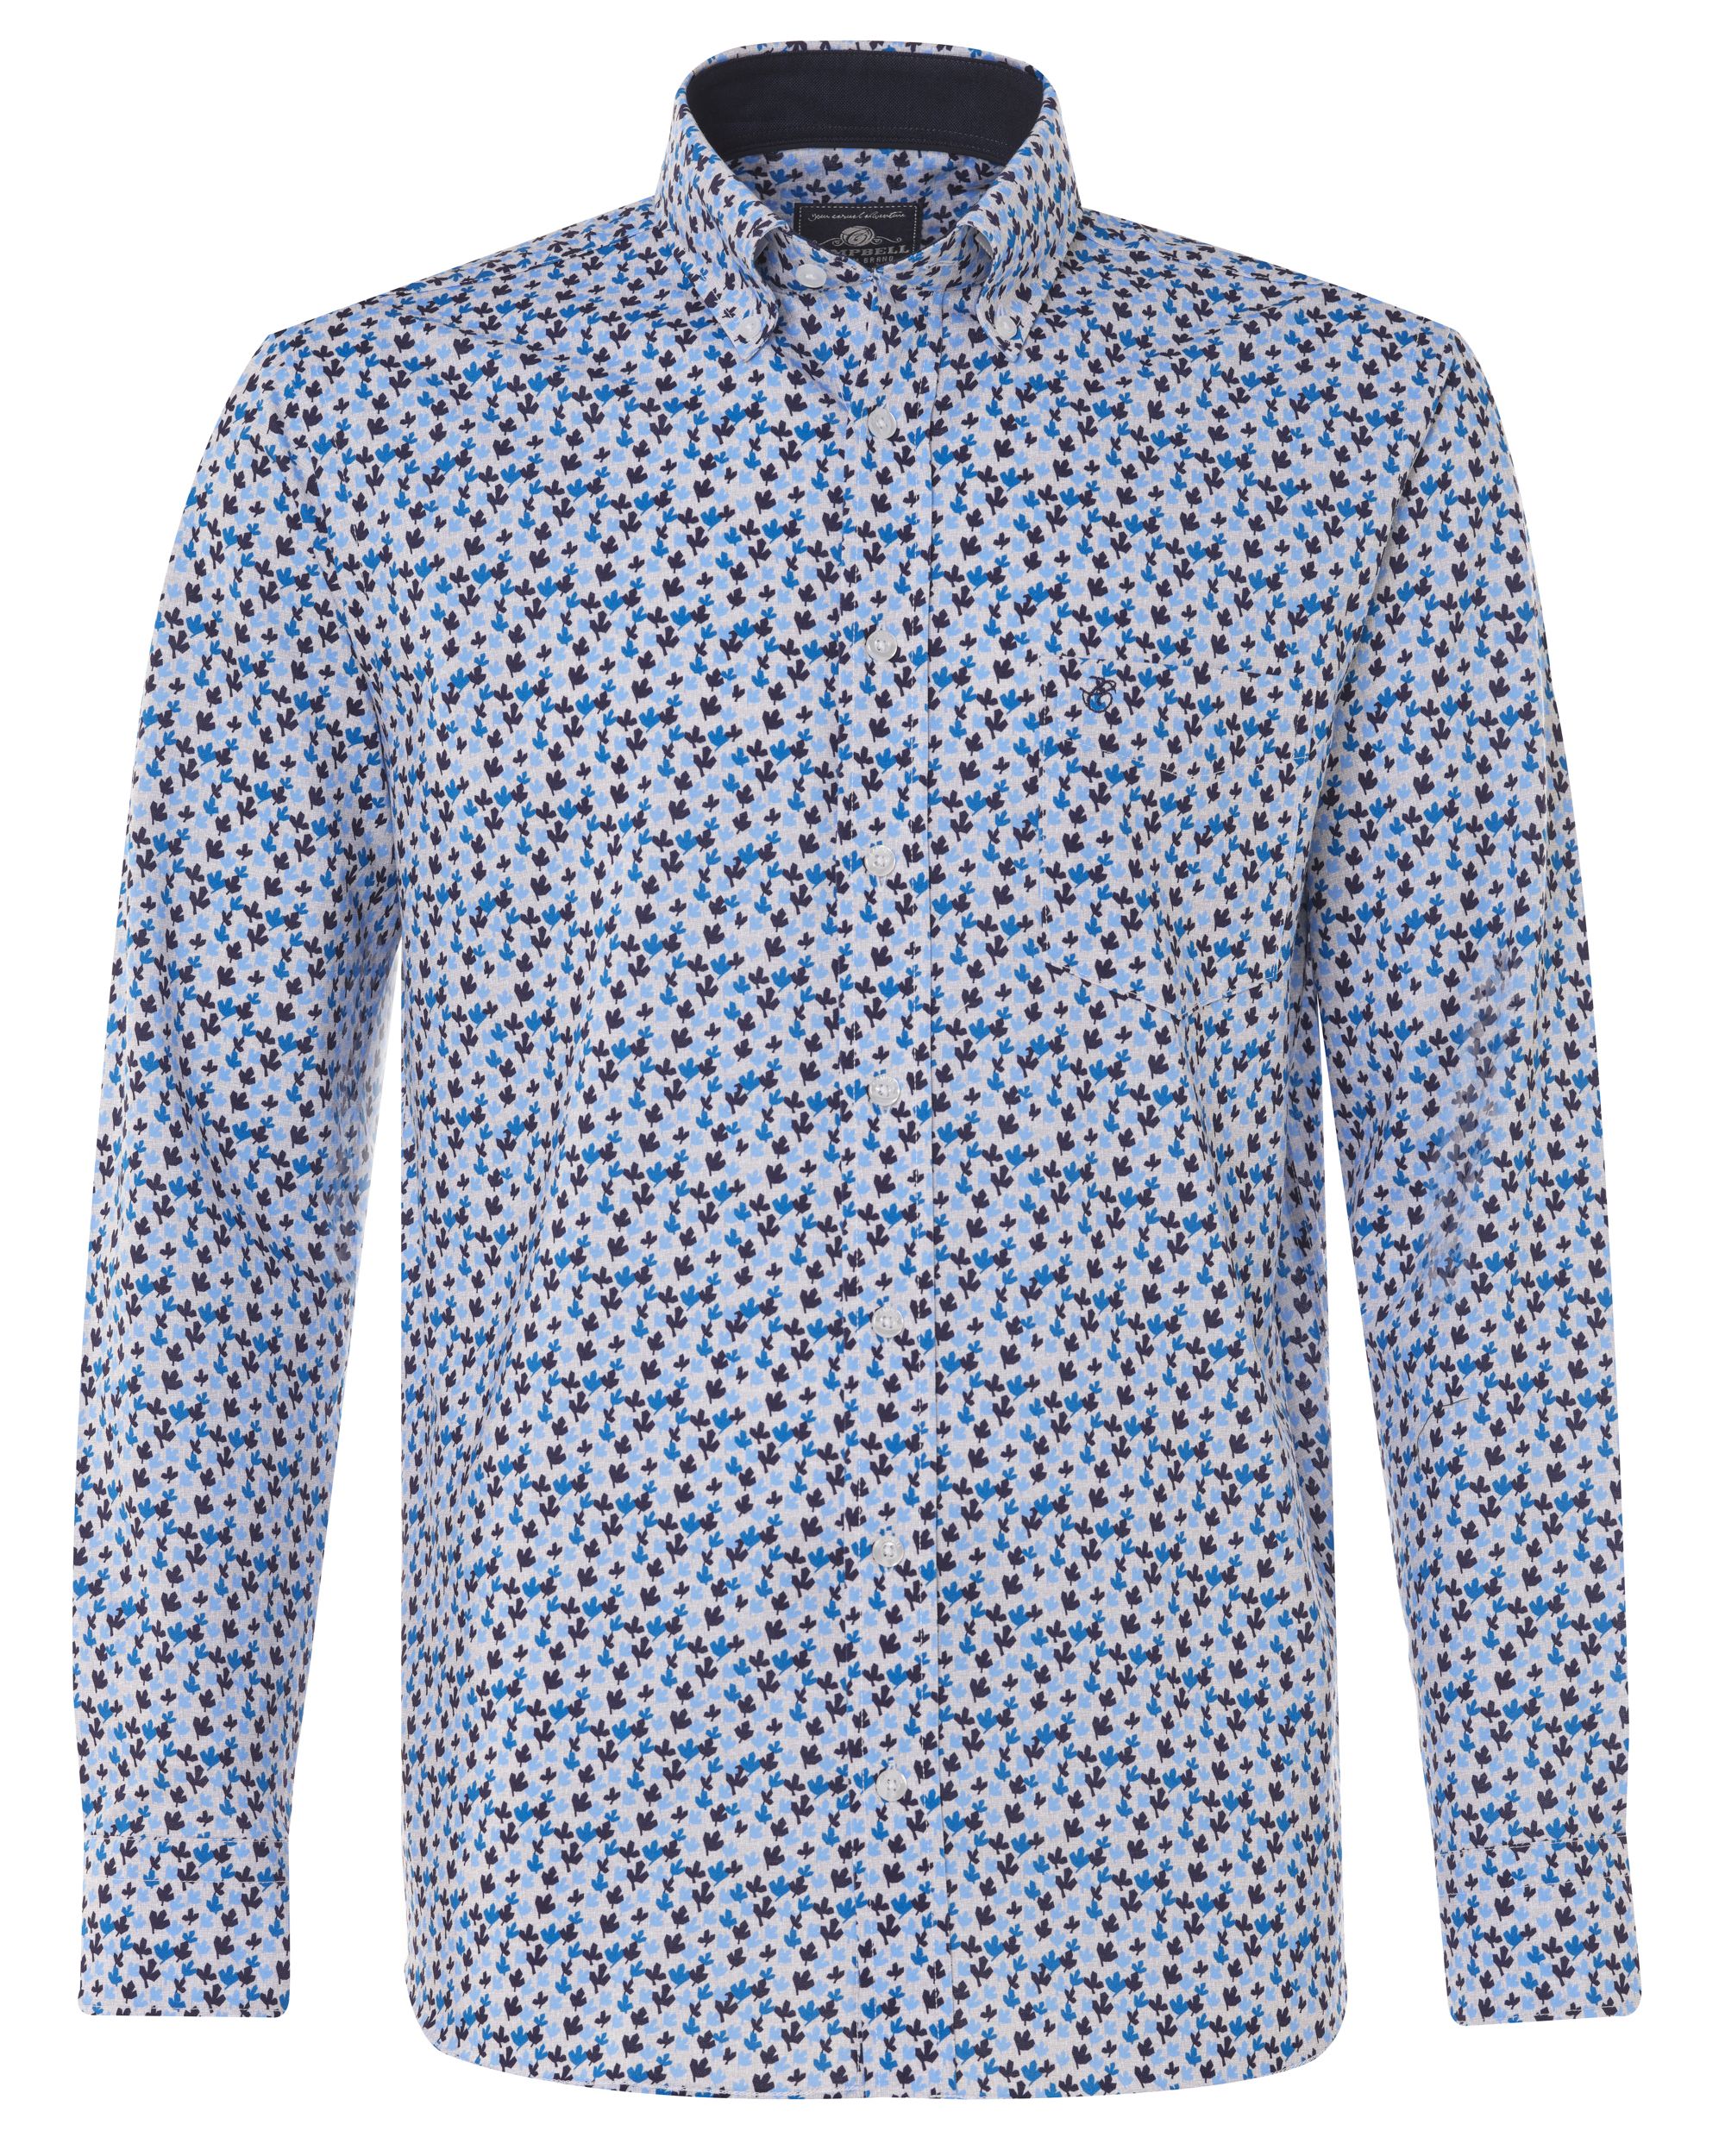 Campbell Classic Casual Overhemd LM Blauw print 076482-012-L